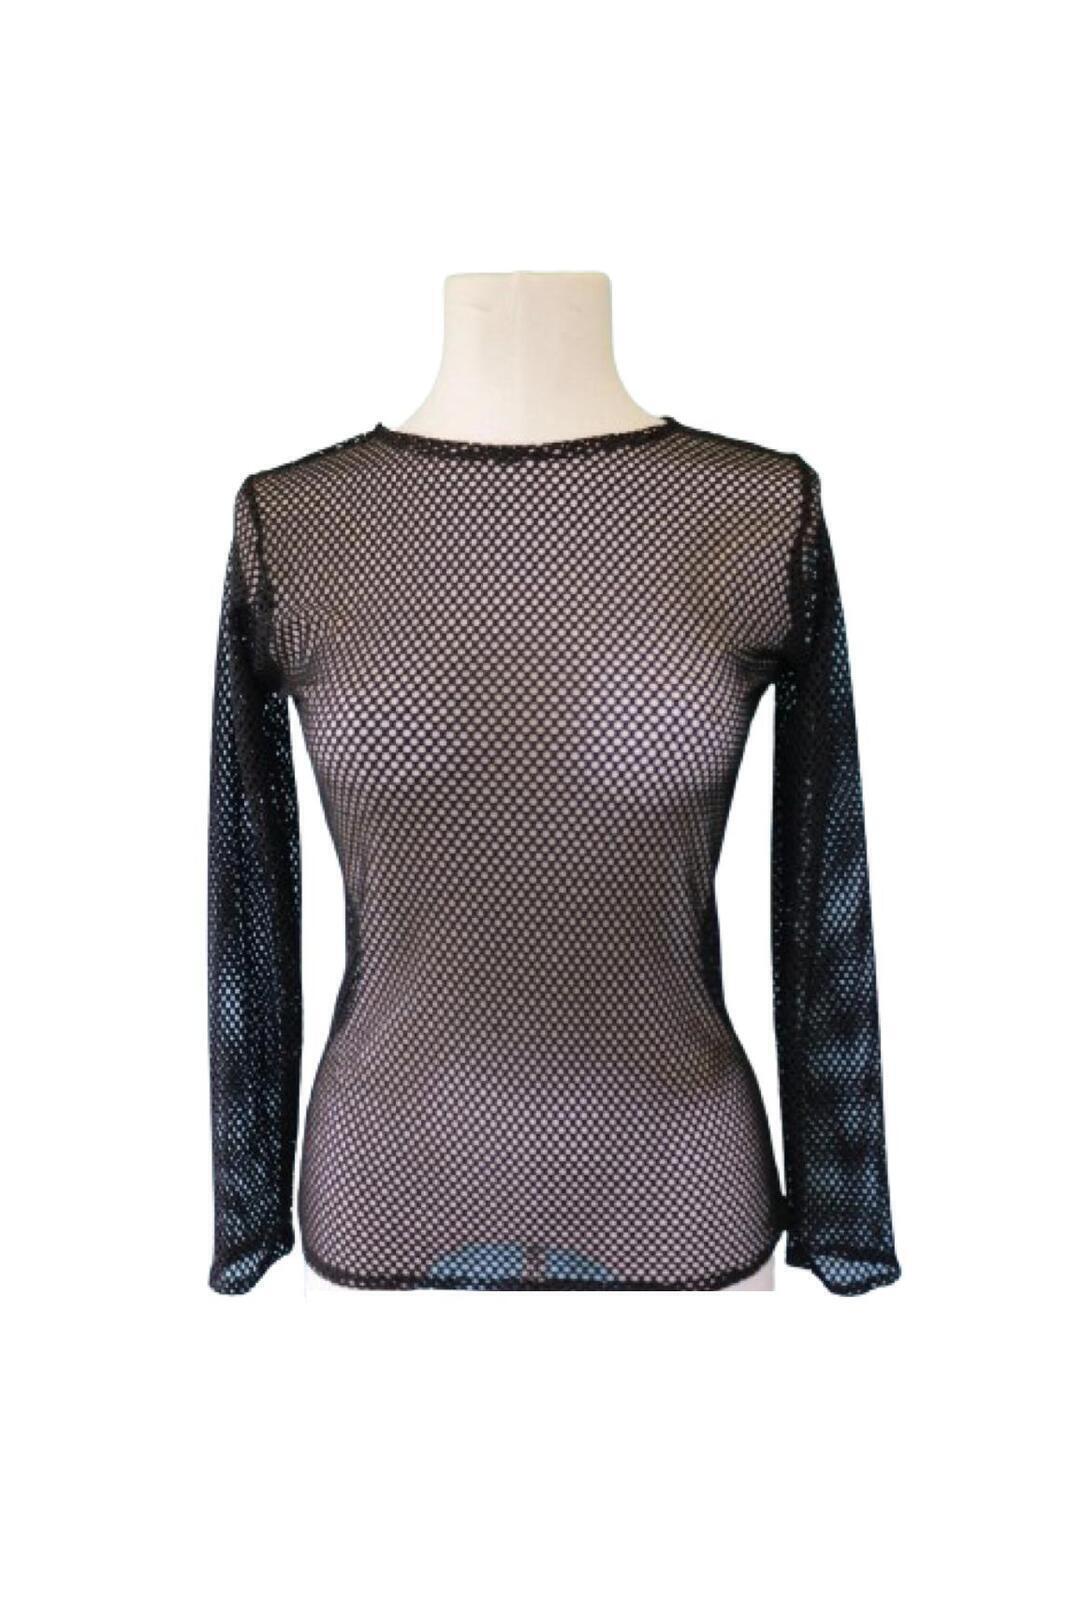 LONG SLEEVE FISHNET TOP Blouse T Shirt Tee Costume Party See